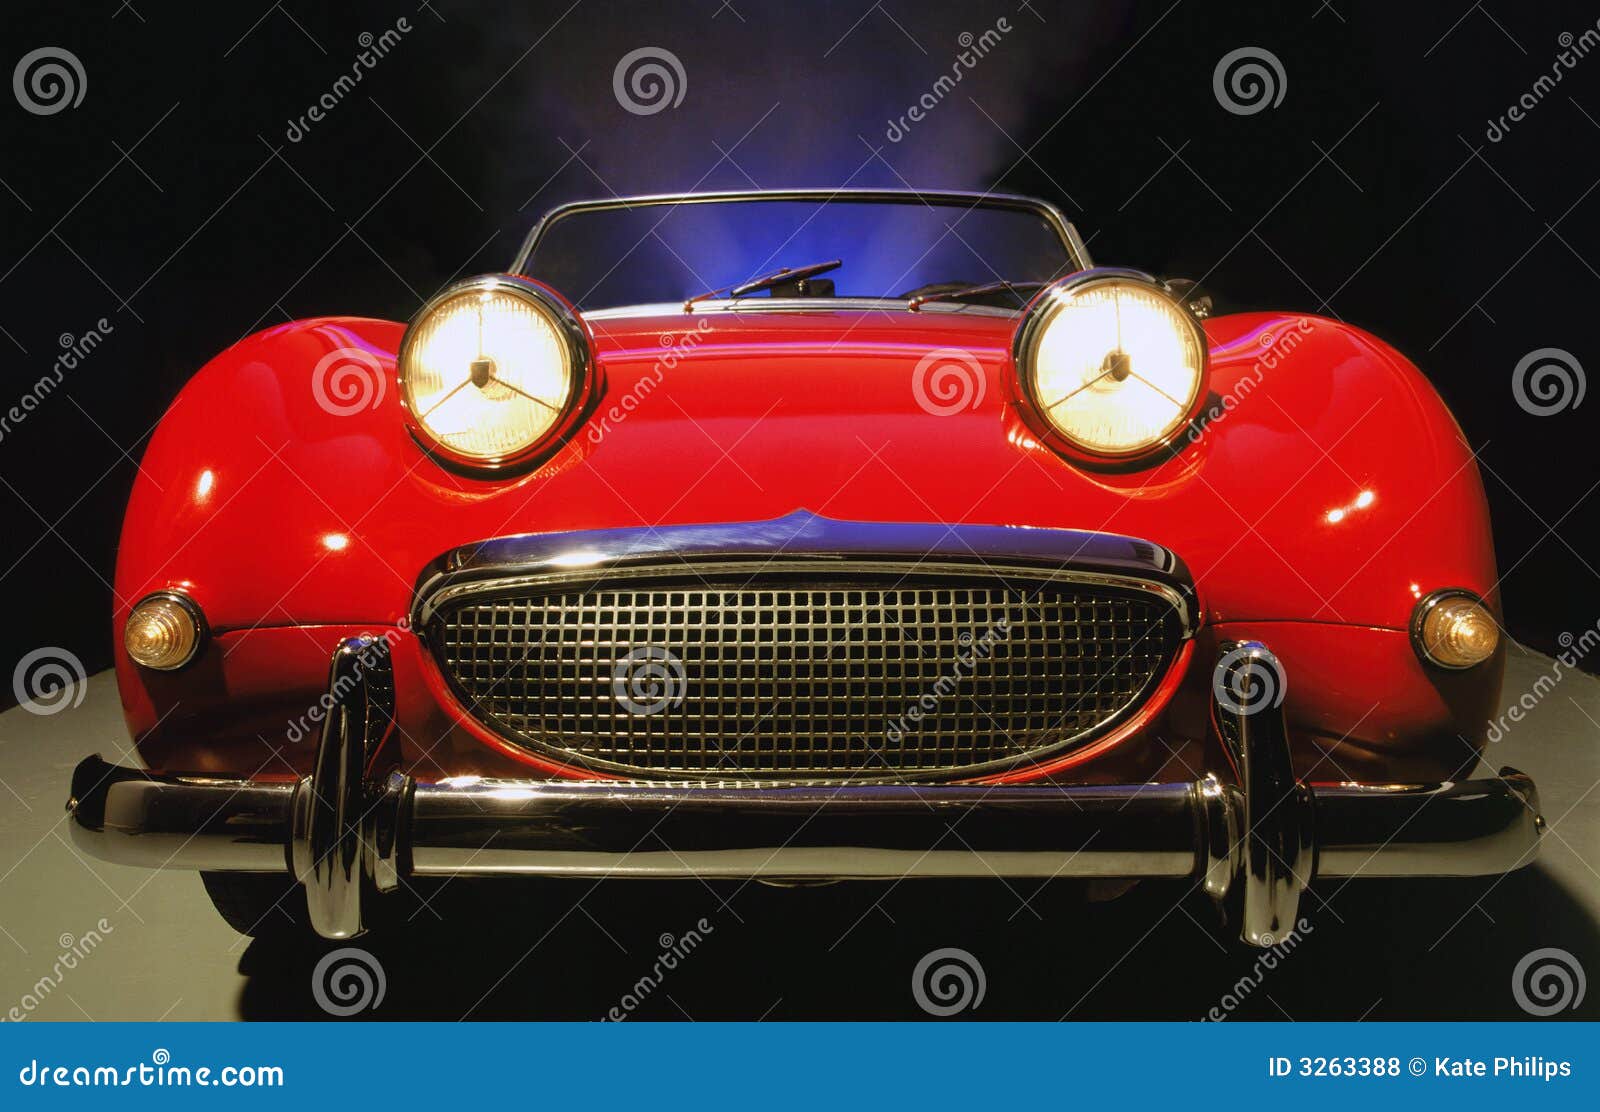 Classic Sports Car Royalty Free Stock Photos  Image: 3263388